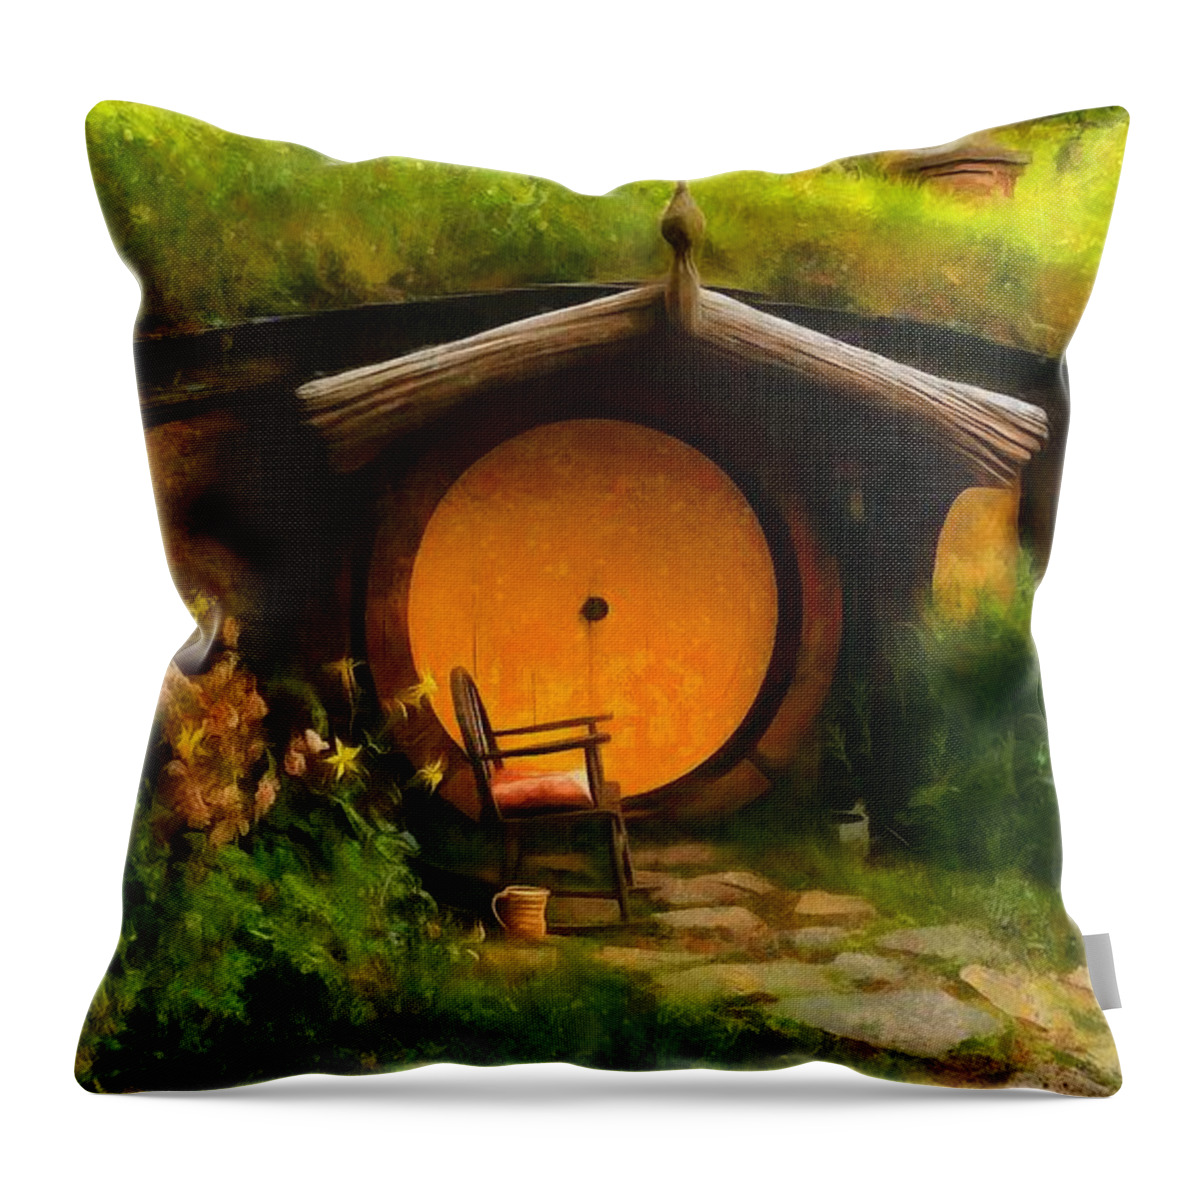 Hobbit Hole Throw Pillow featuring the painting Take a Sit by Eva Lechner